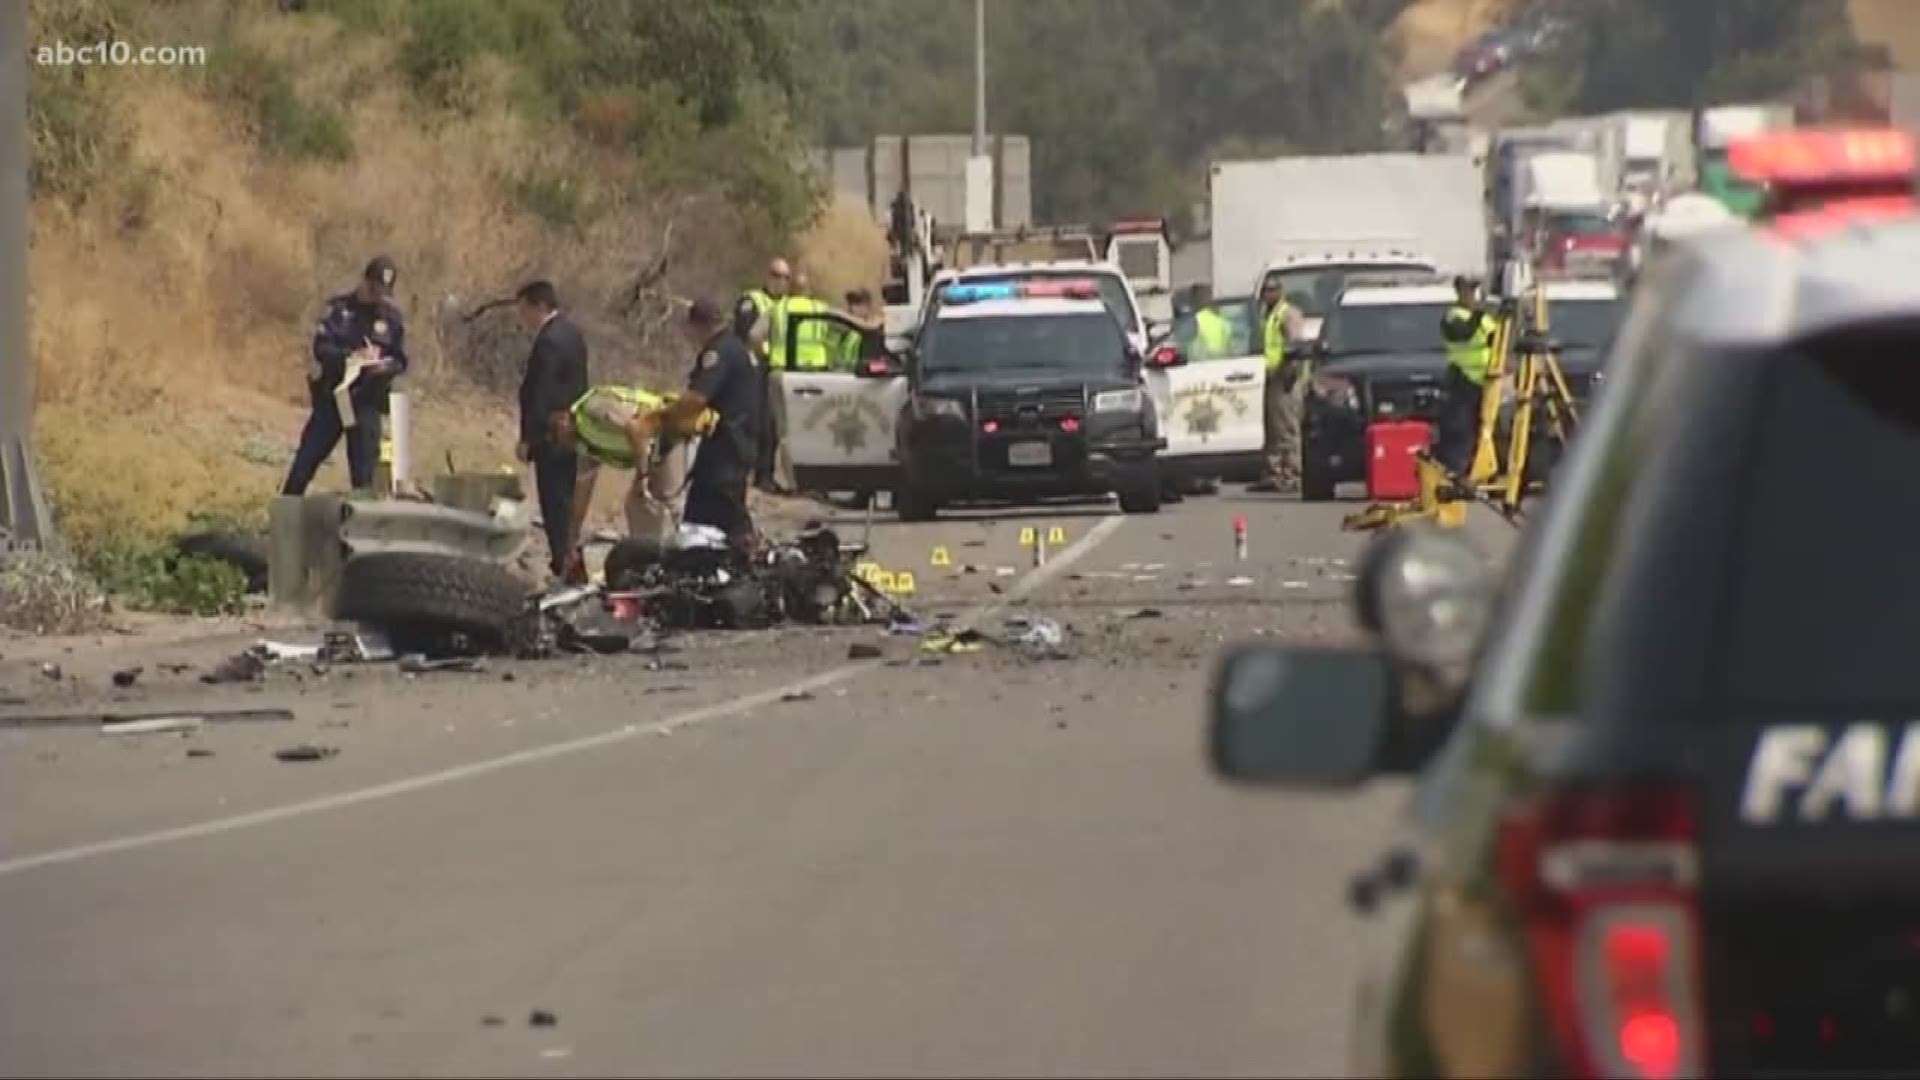 A Rocklin man has been identified as the person who killed CHP Officer Kirk Griess.